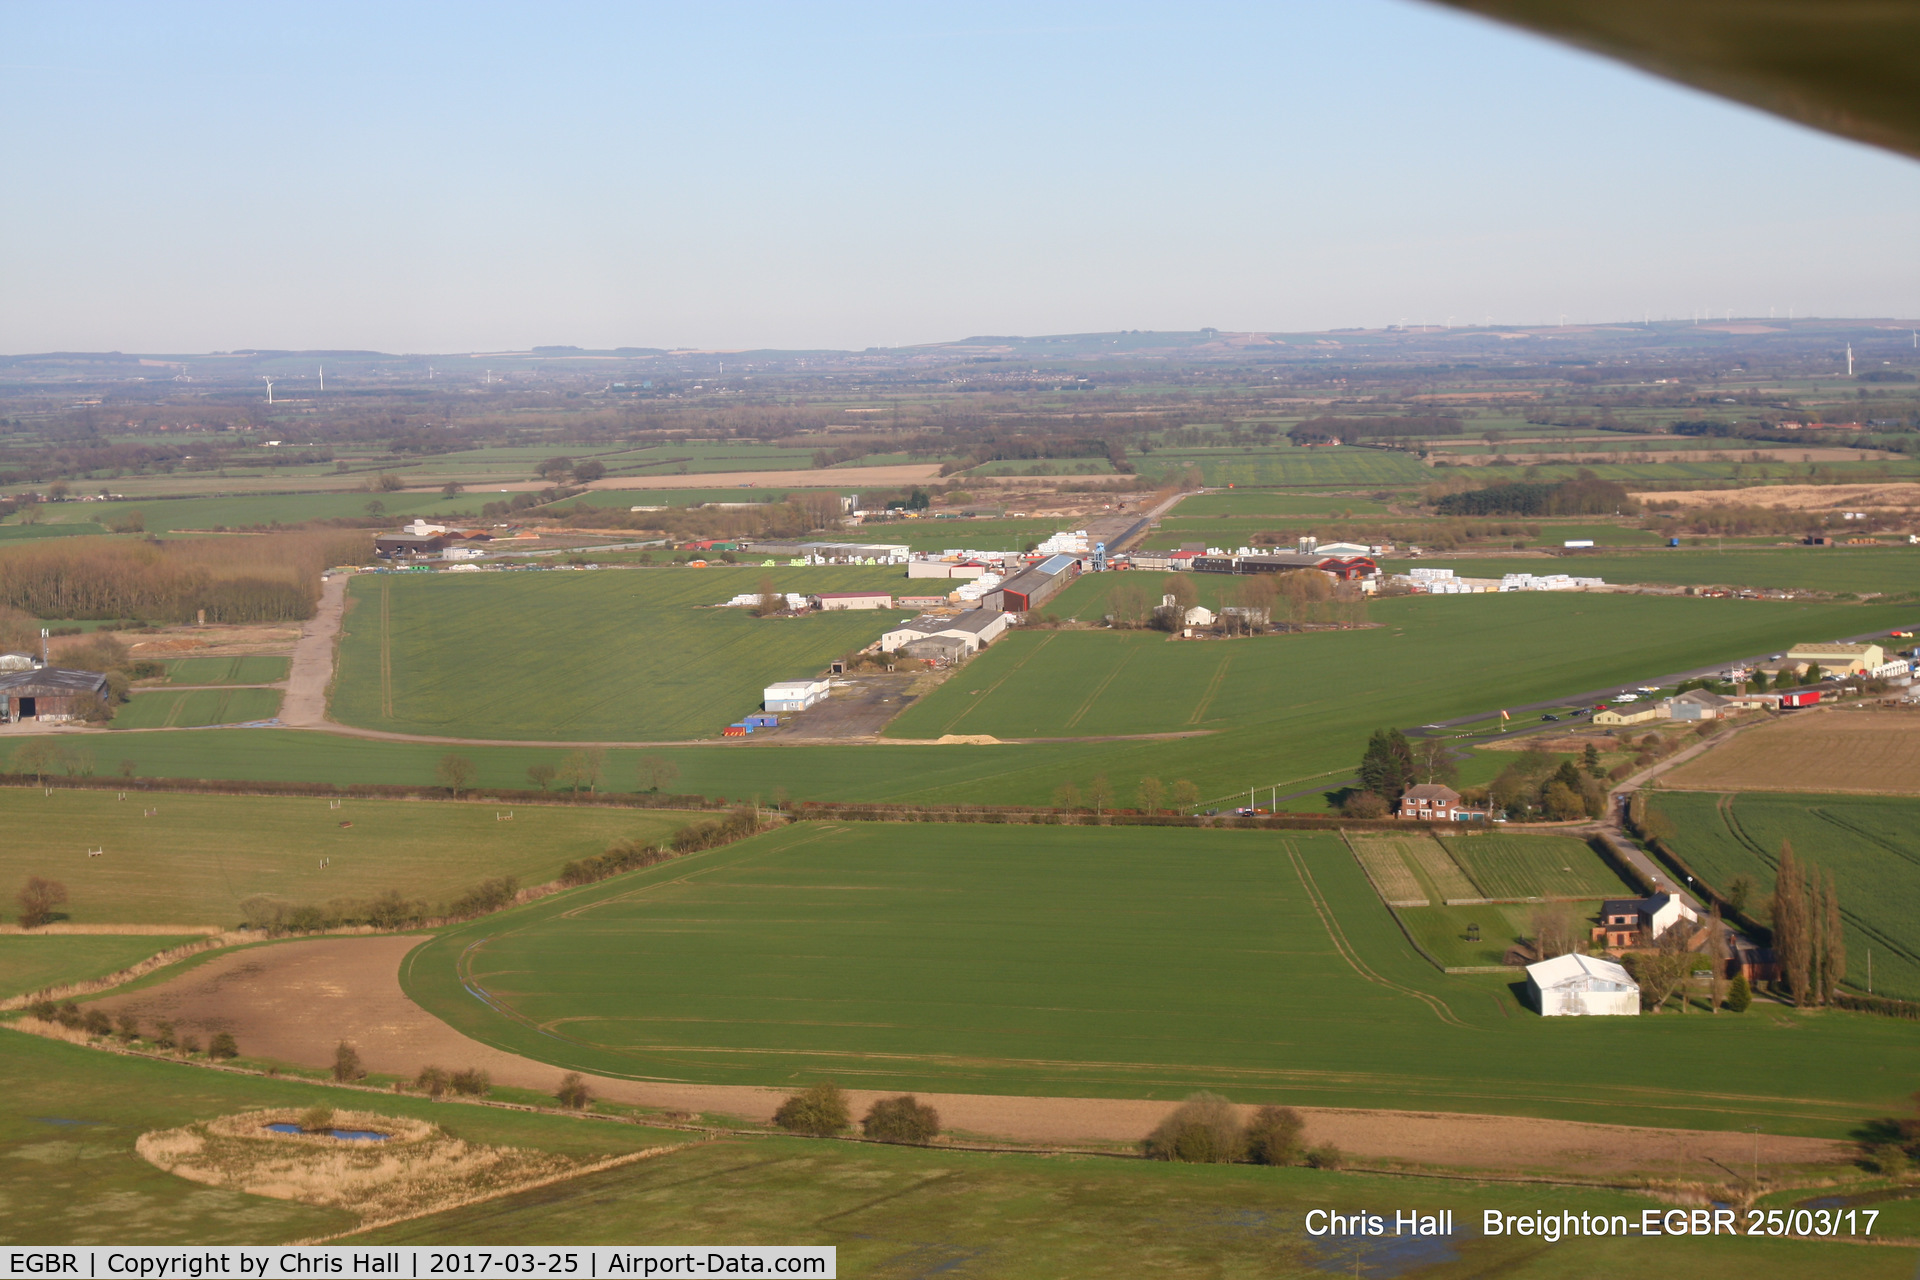 EGBR Airport - view across the former WWII bomber base at Breighton, the grass strip is to the right of the photo